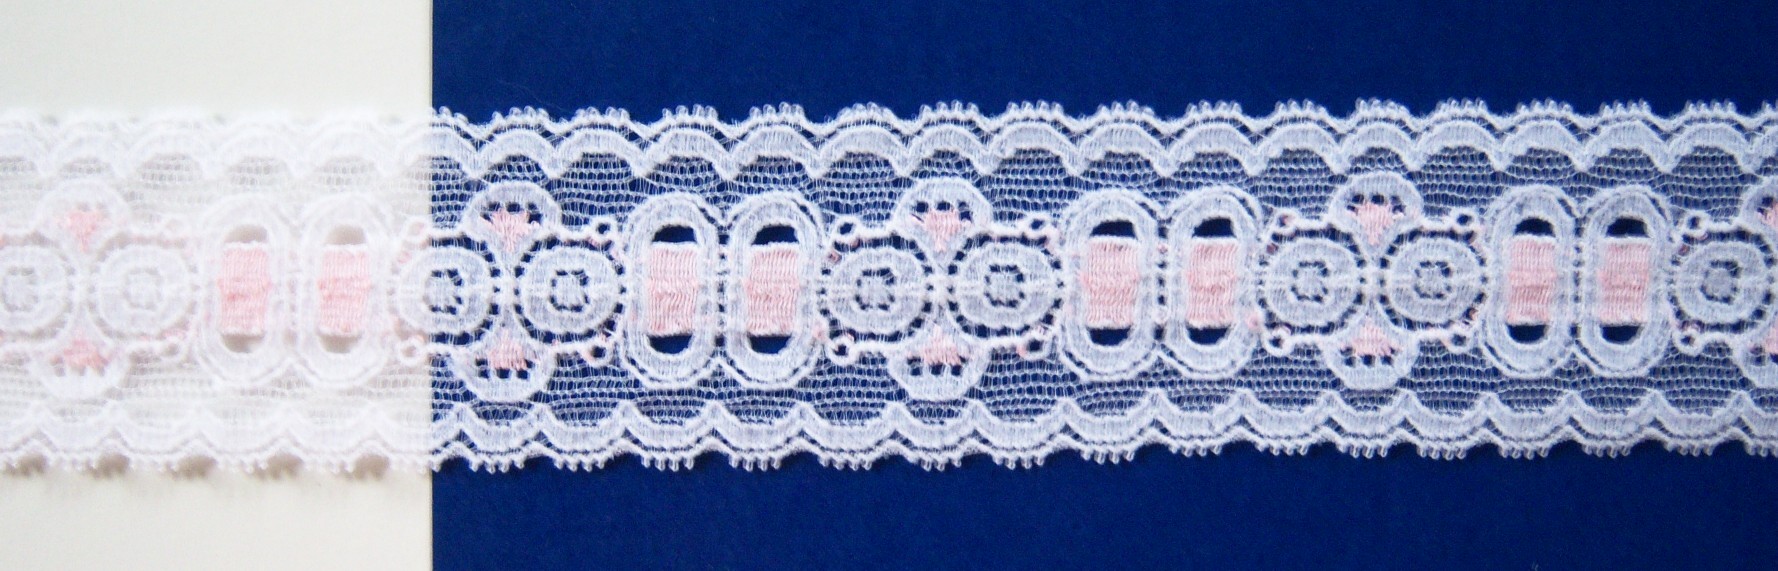 White/Pink 1 3/4" Stretch Lace